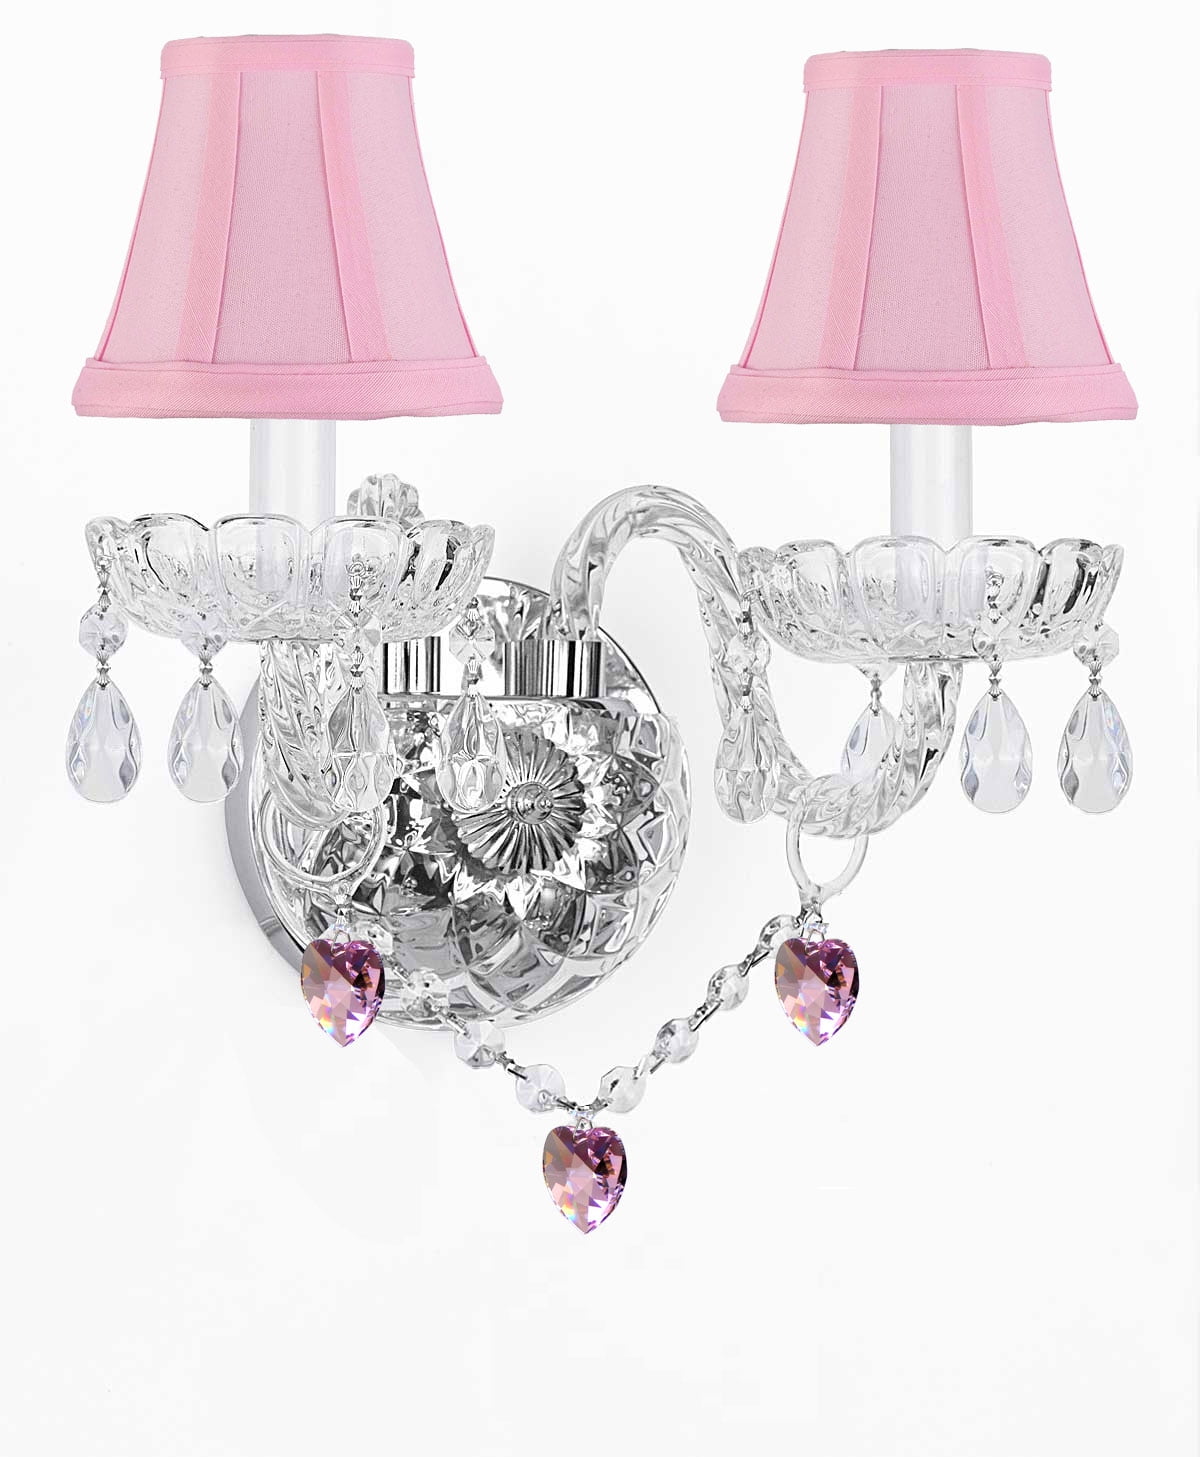 PERFECT FOR GIRLS BEDROOM! CHANDELIER LIGHTING W/ CRYSTAL PINK SHADES & HEARTS 